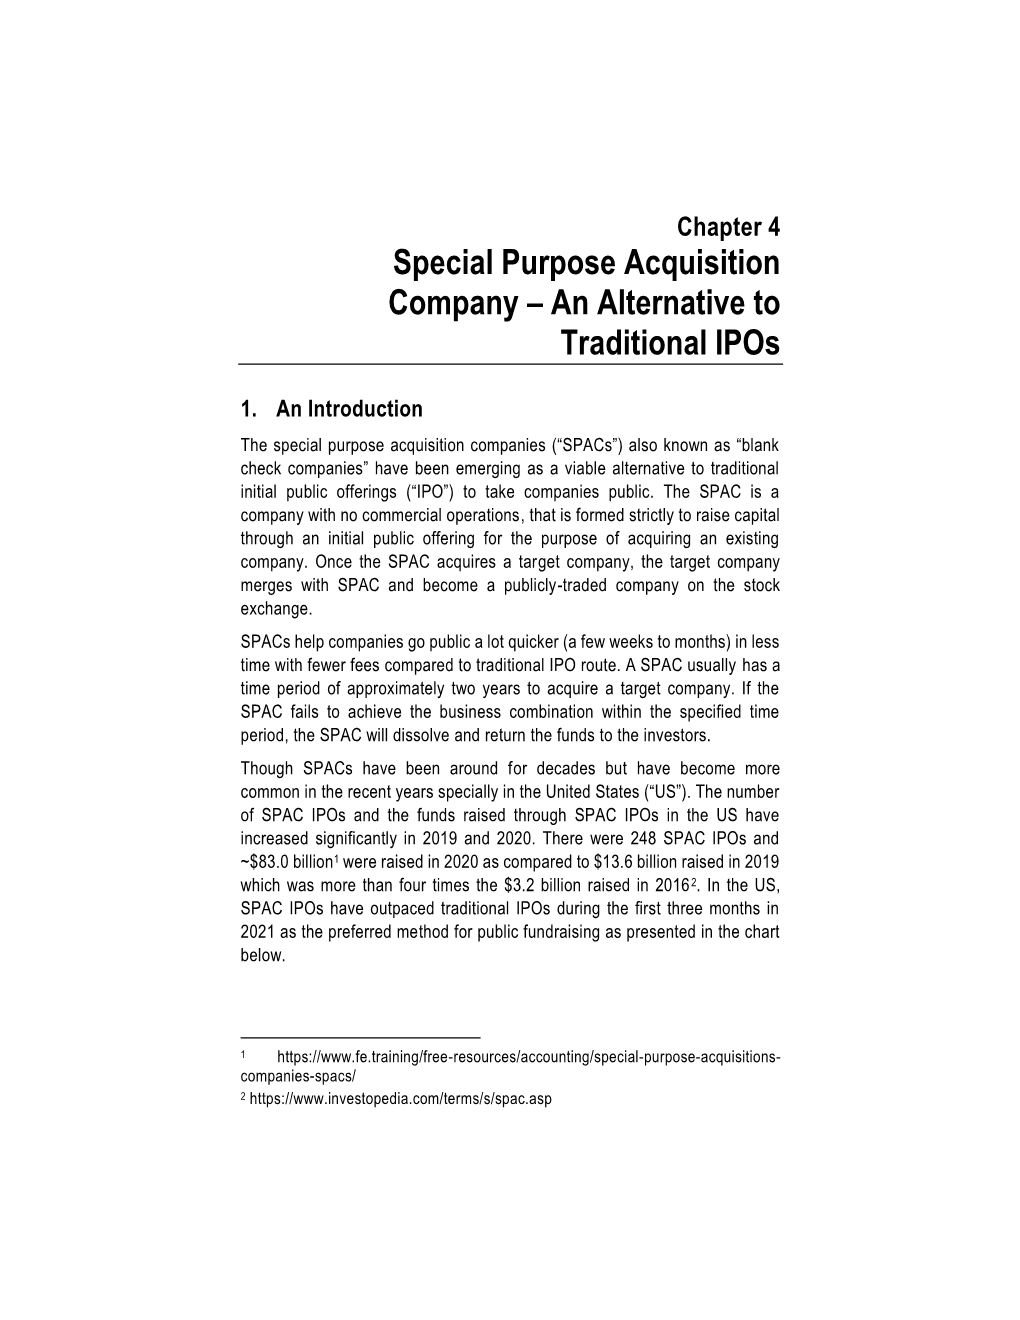 Special Purpose Acquisition Company – an Alternative to Traditional Ipos